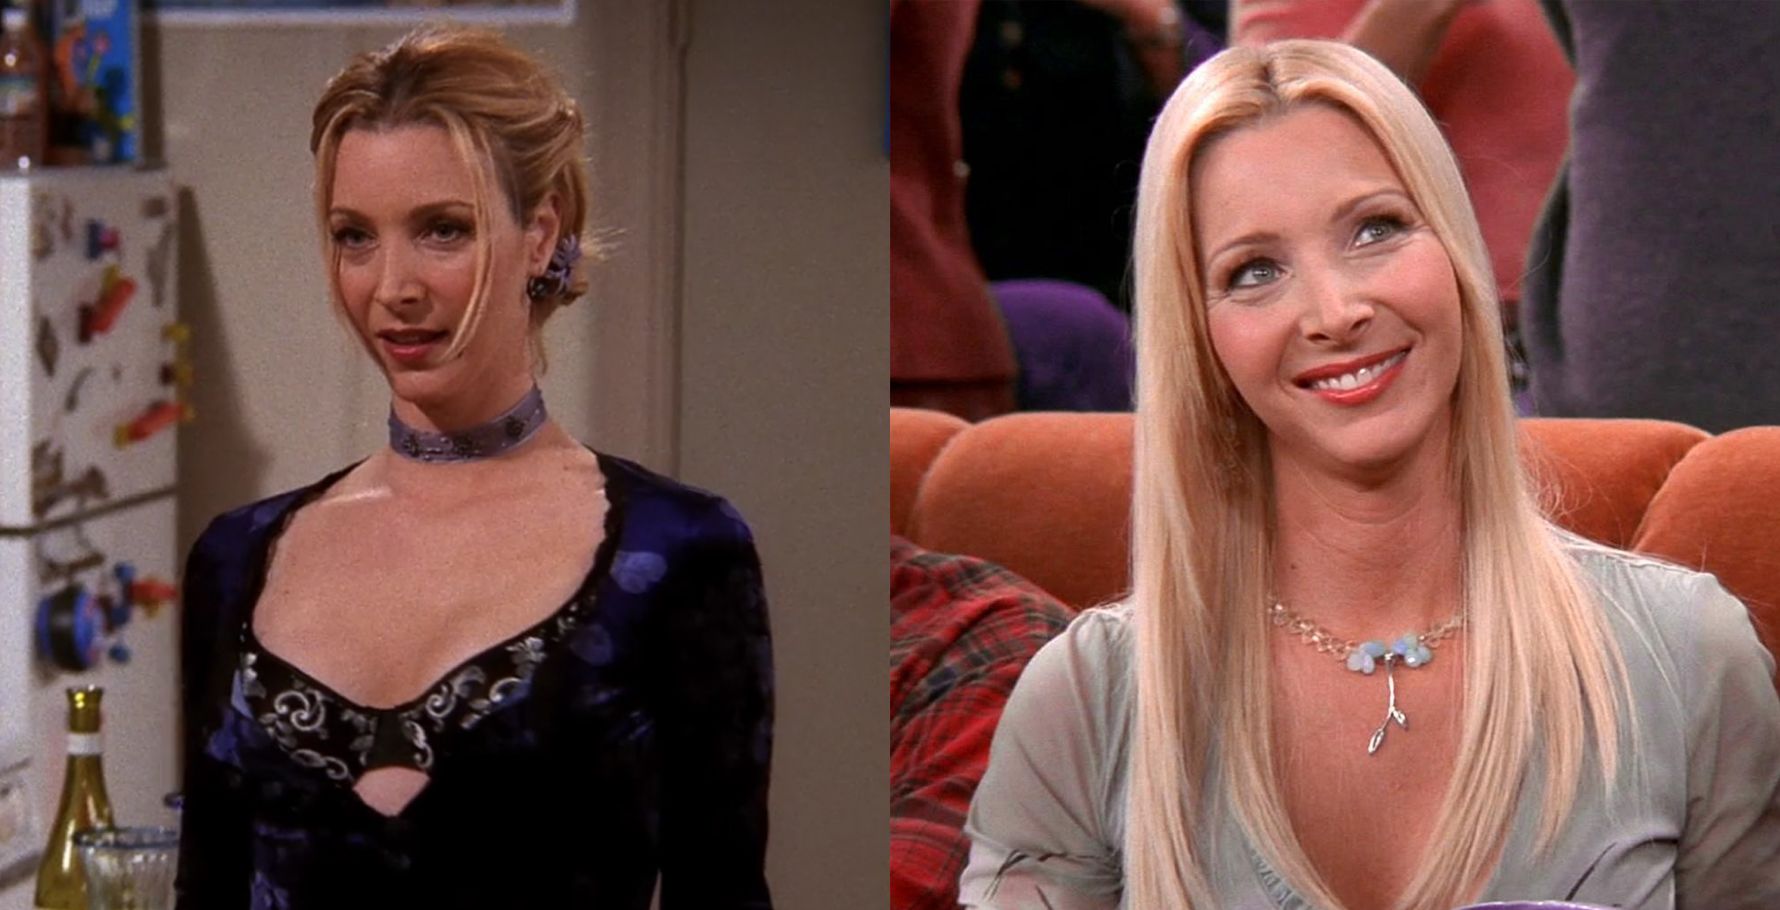 Friends: The 15 Most Hilarious Quotes From Phoebe Buffay